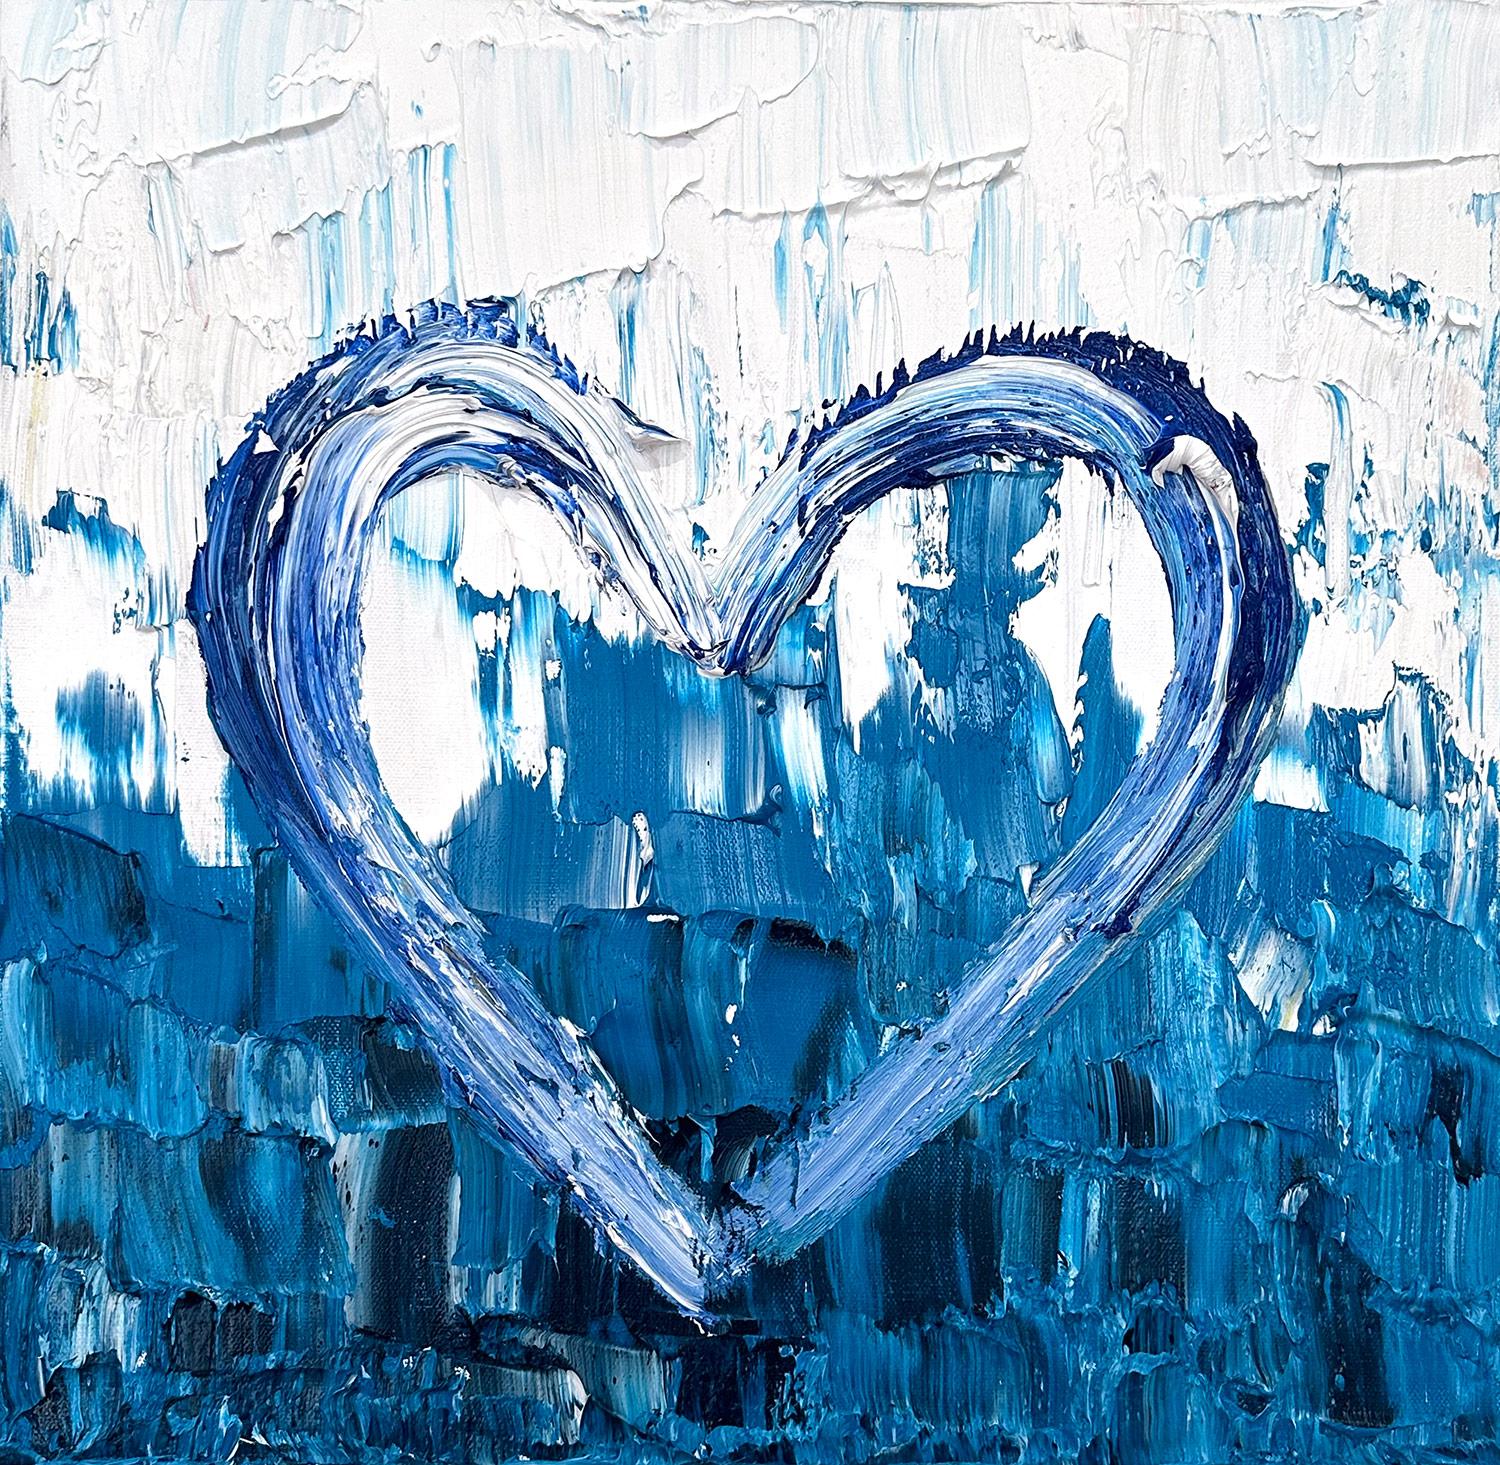 Cindy Shaoul Abstract Painting - "My St. Barths Heart" Blue Gradient Contemporary Oil Painting on Canvas